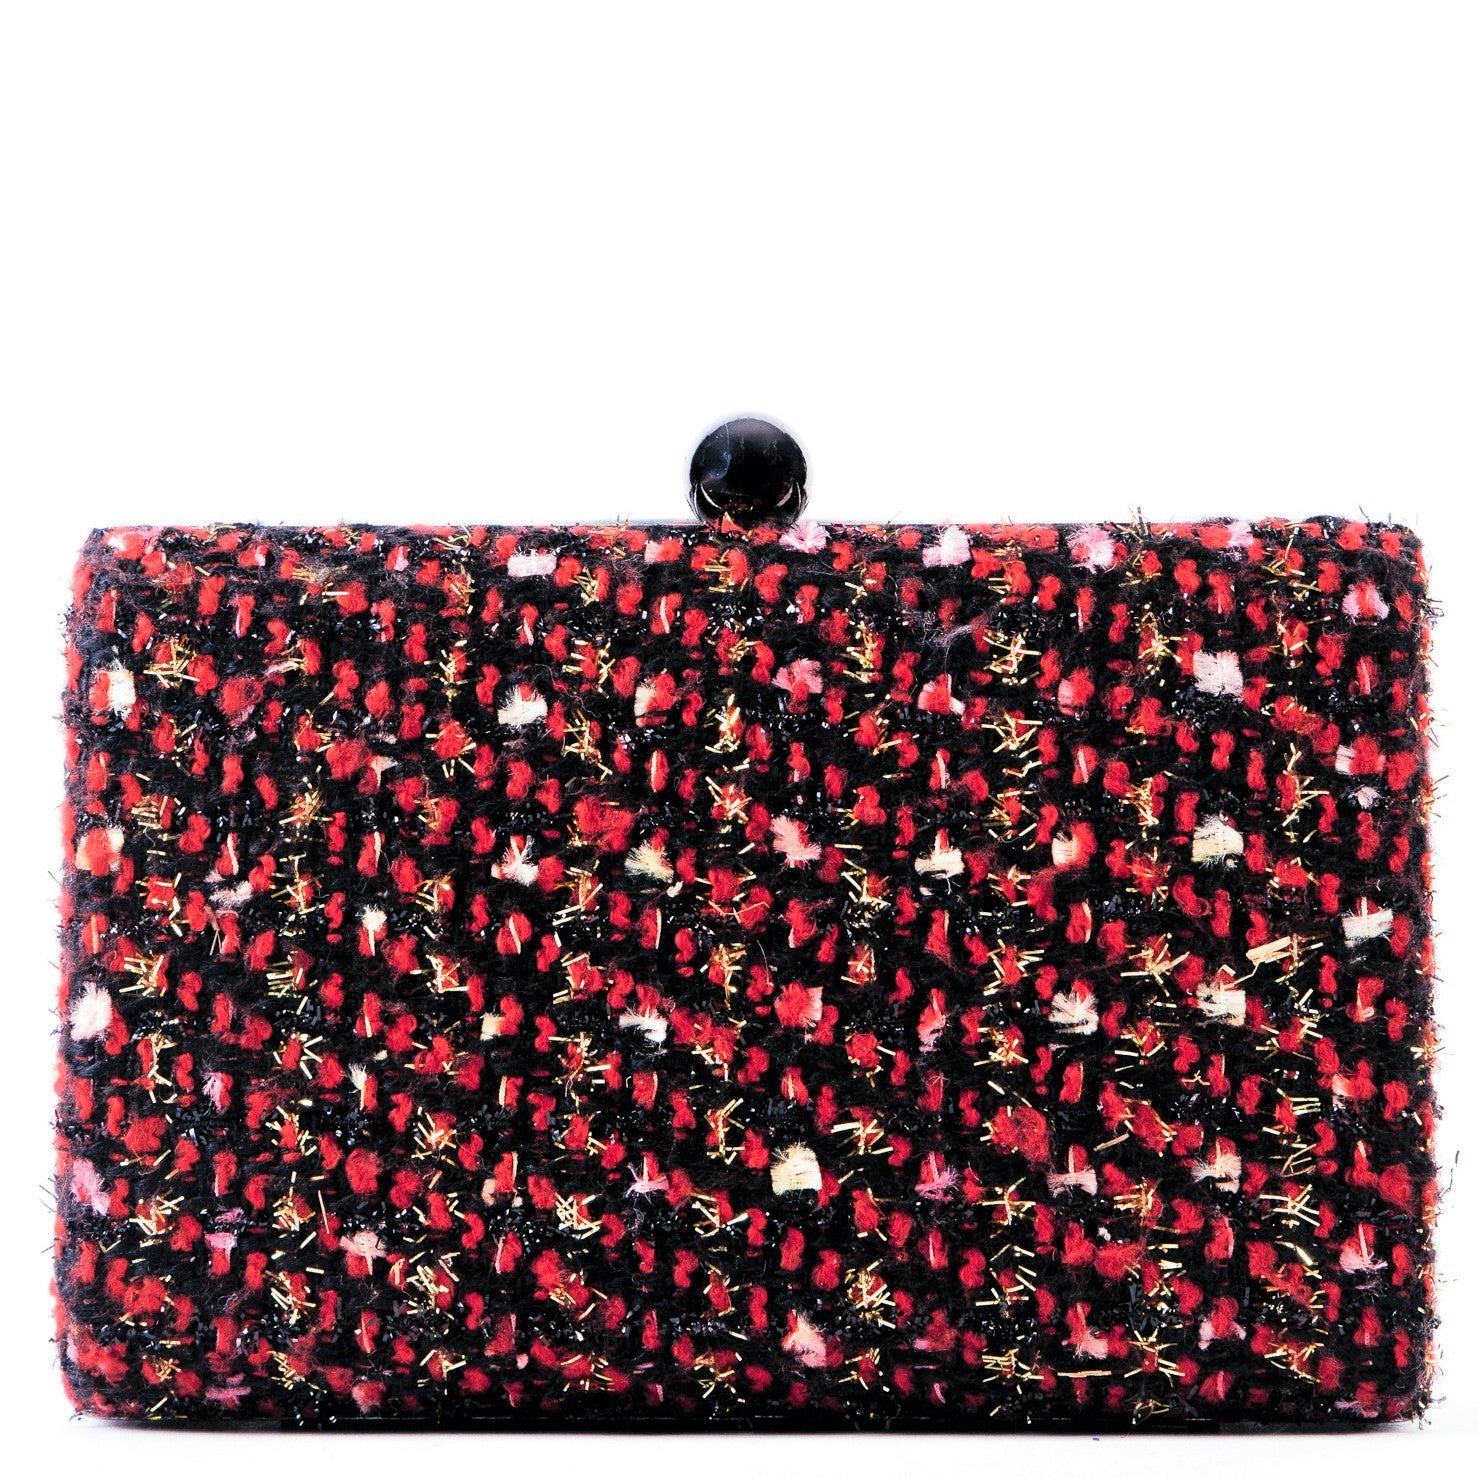 Black Box Clutch Envelope Rhinestone Evening Hand Purse for Party |  Baginning